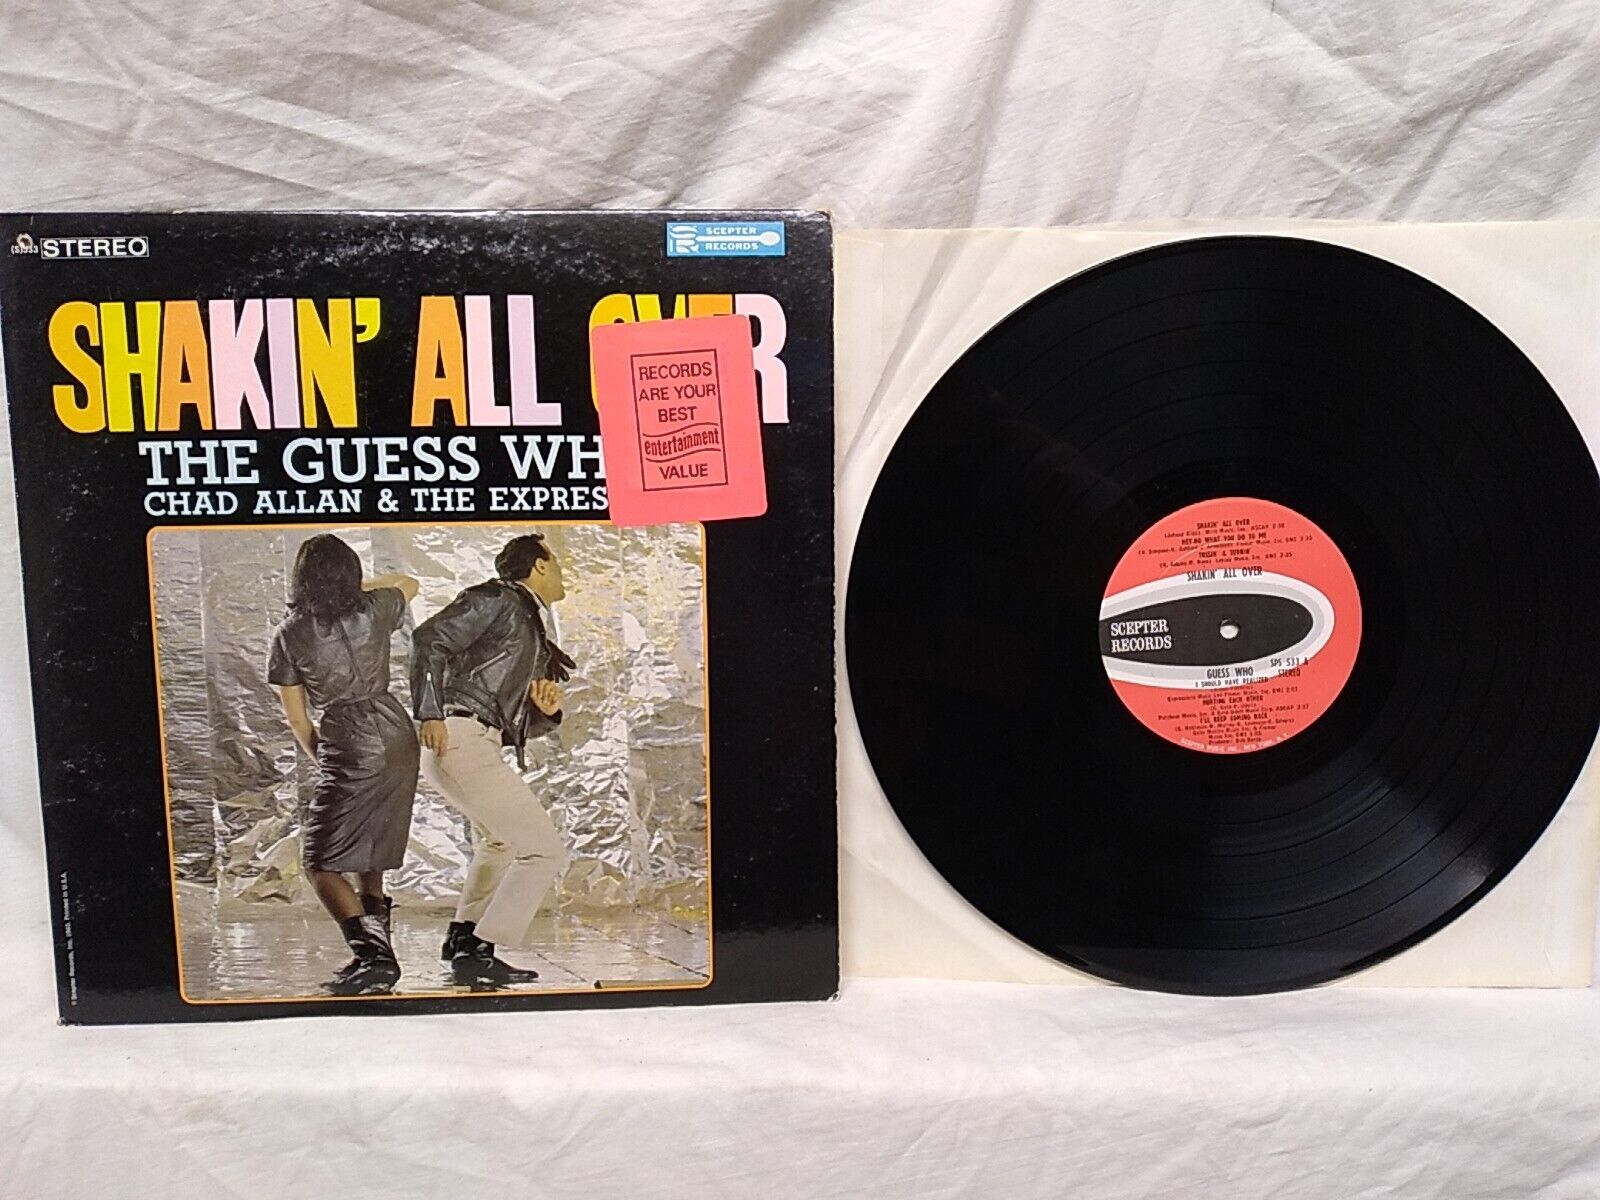 The Guess Who's Chad Allan Shakin' All Over Vinyl LP Scepter Records S 533 1965